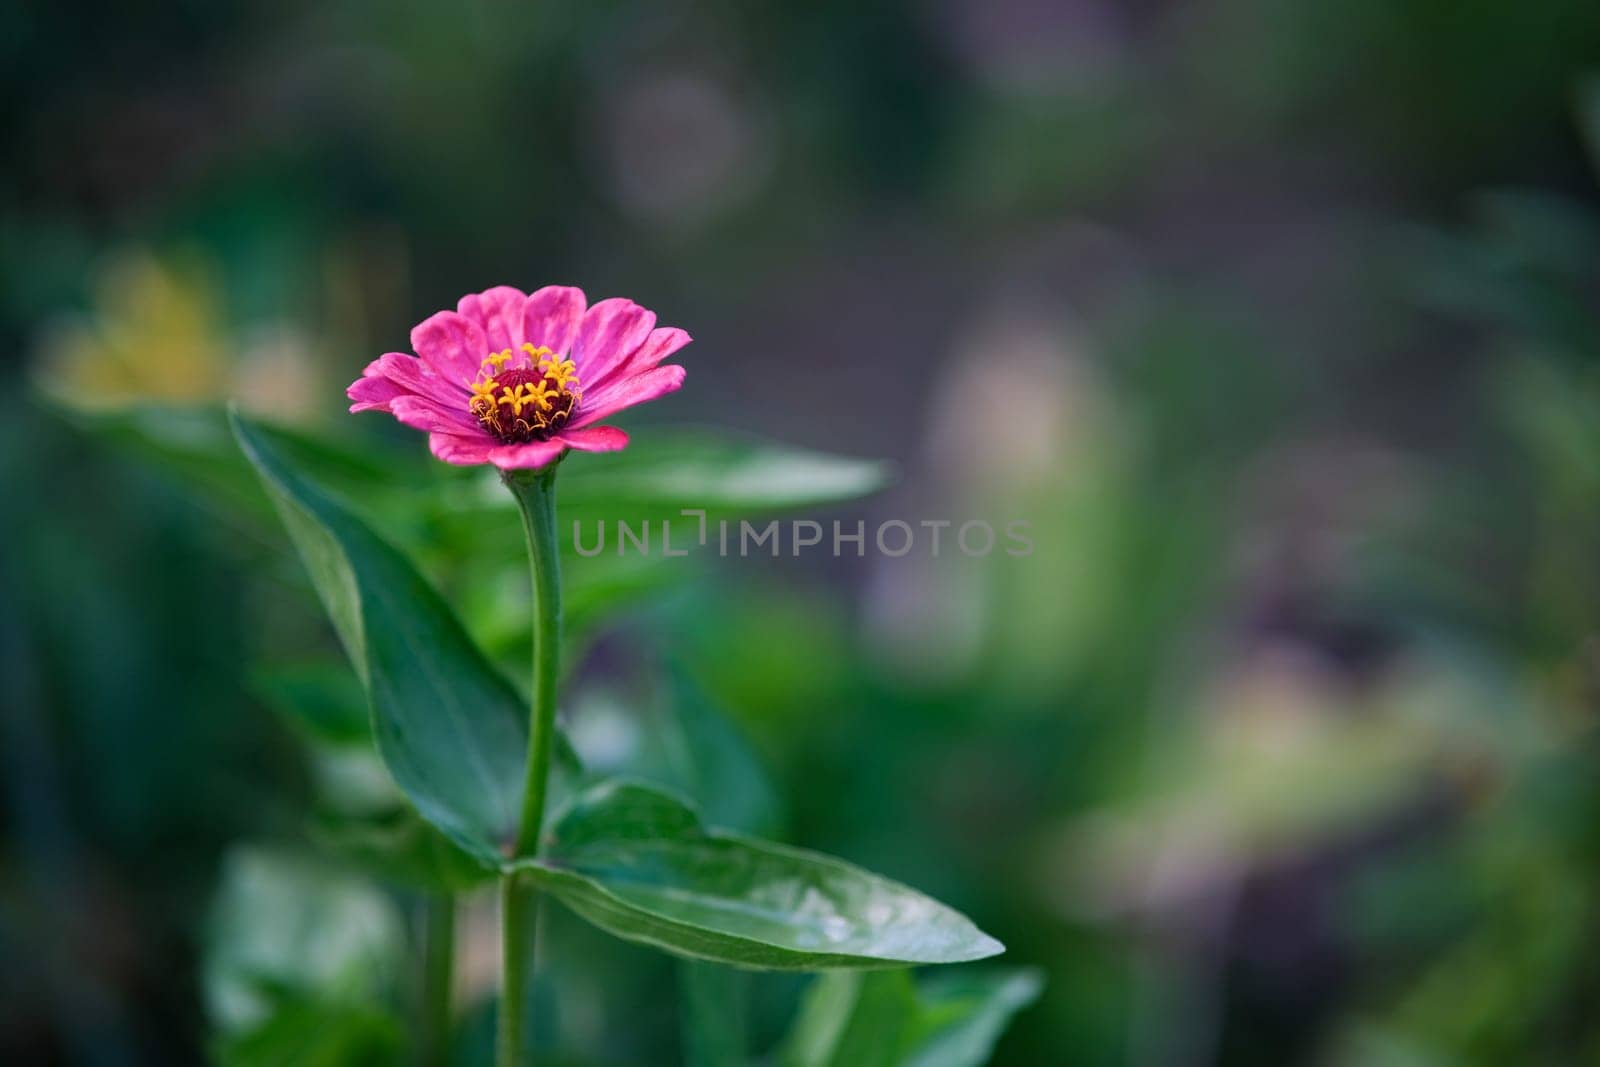 Nogodok in the garden. A lone pink flower with a yellow center in a garden. by N_Design